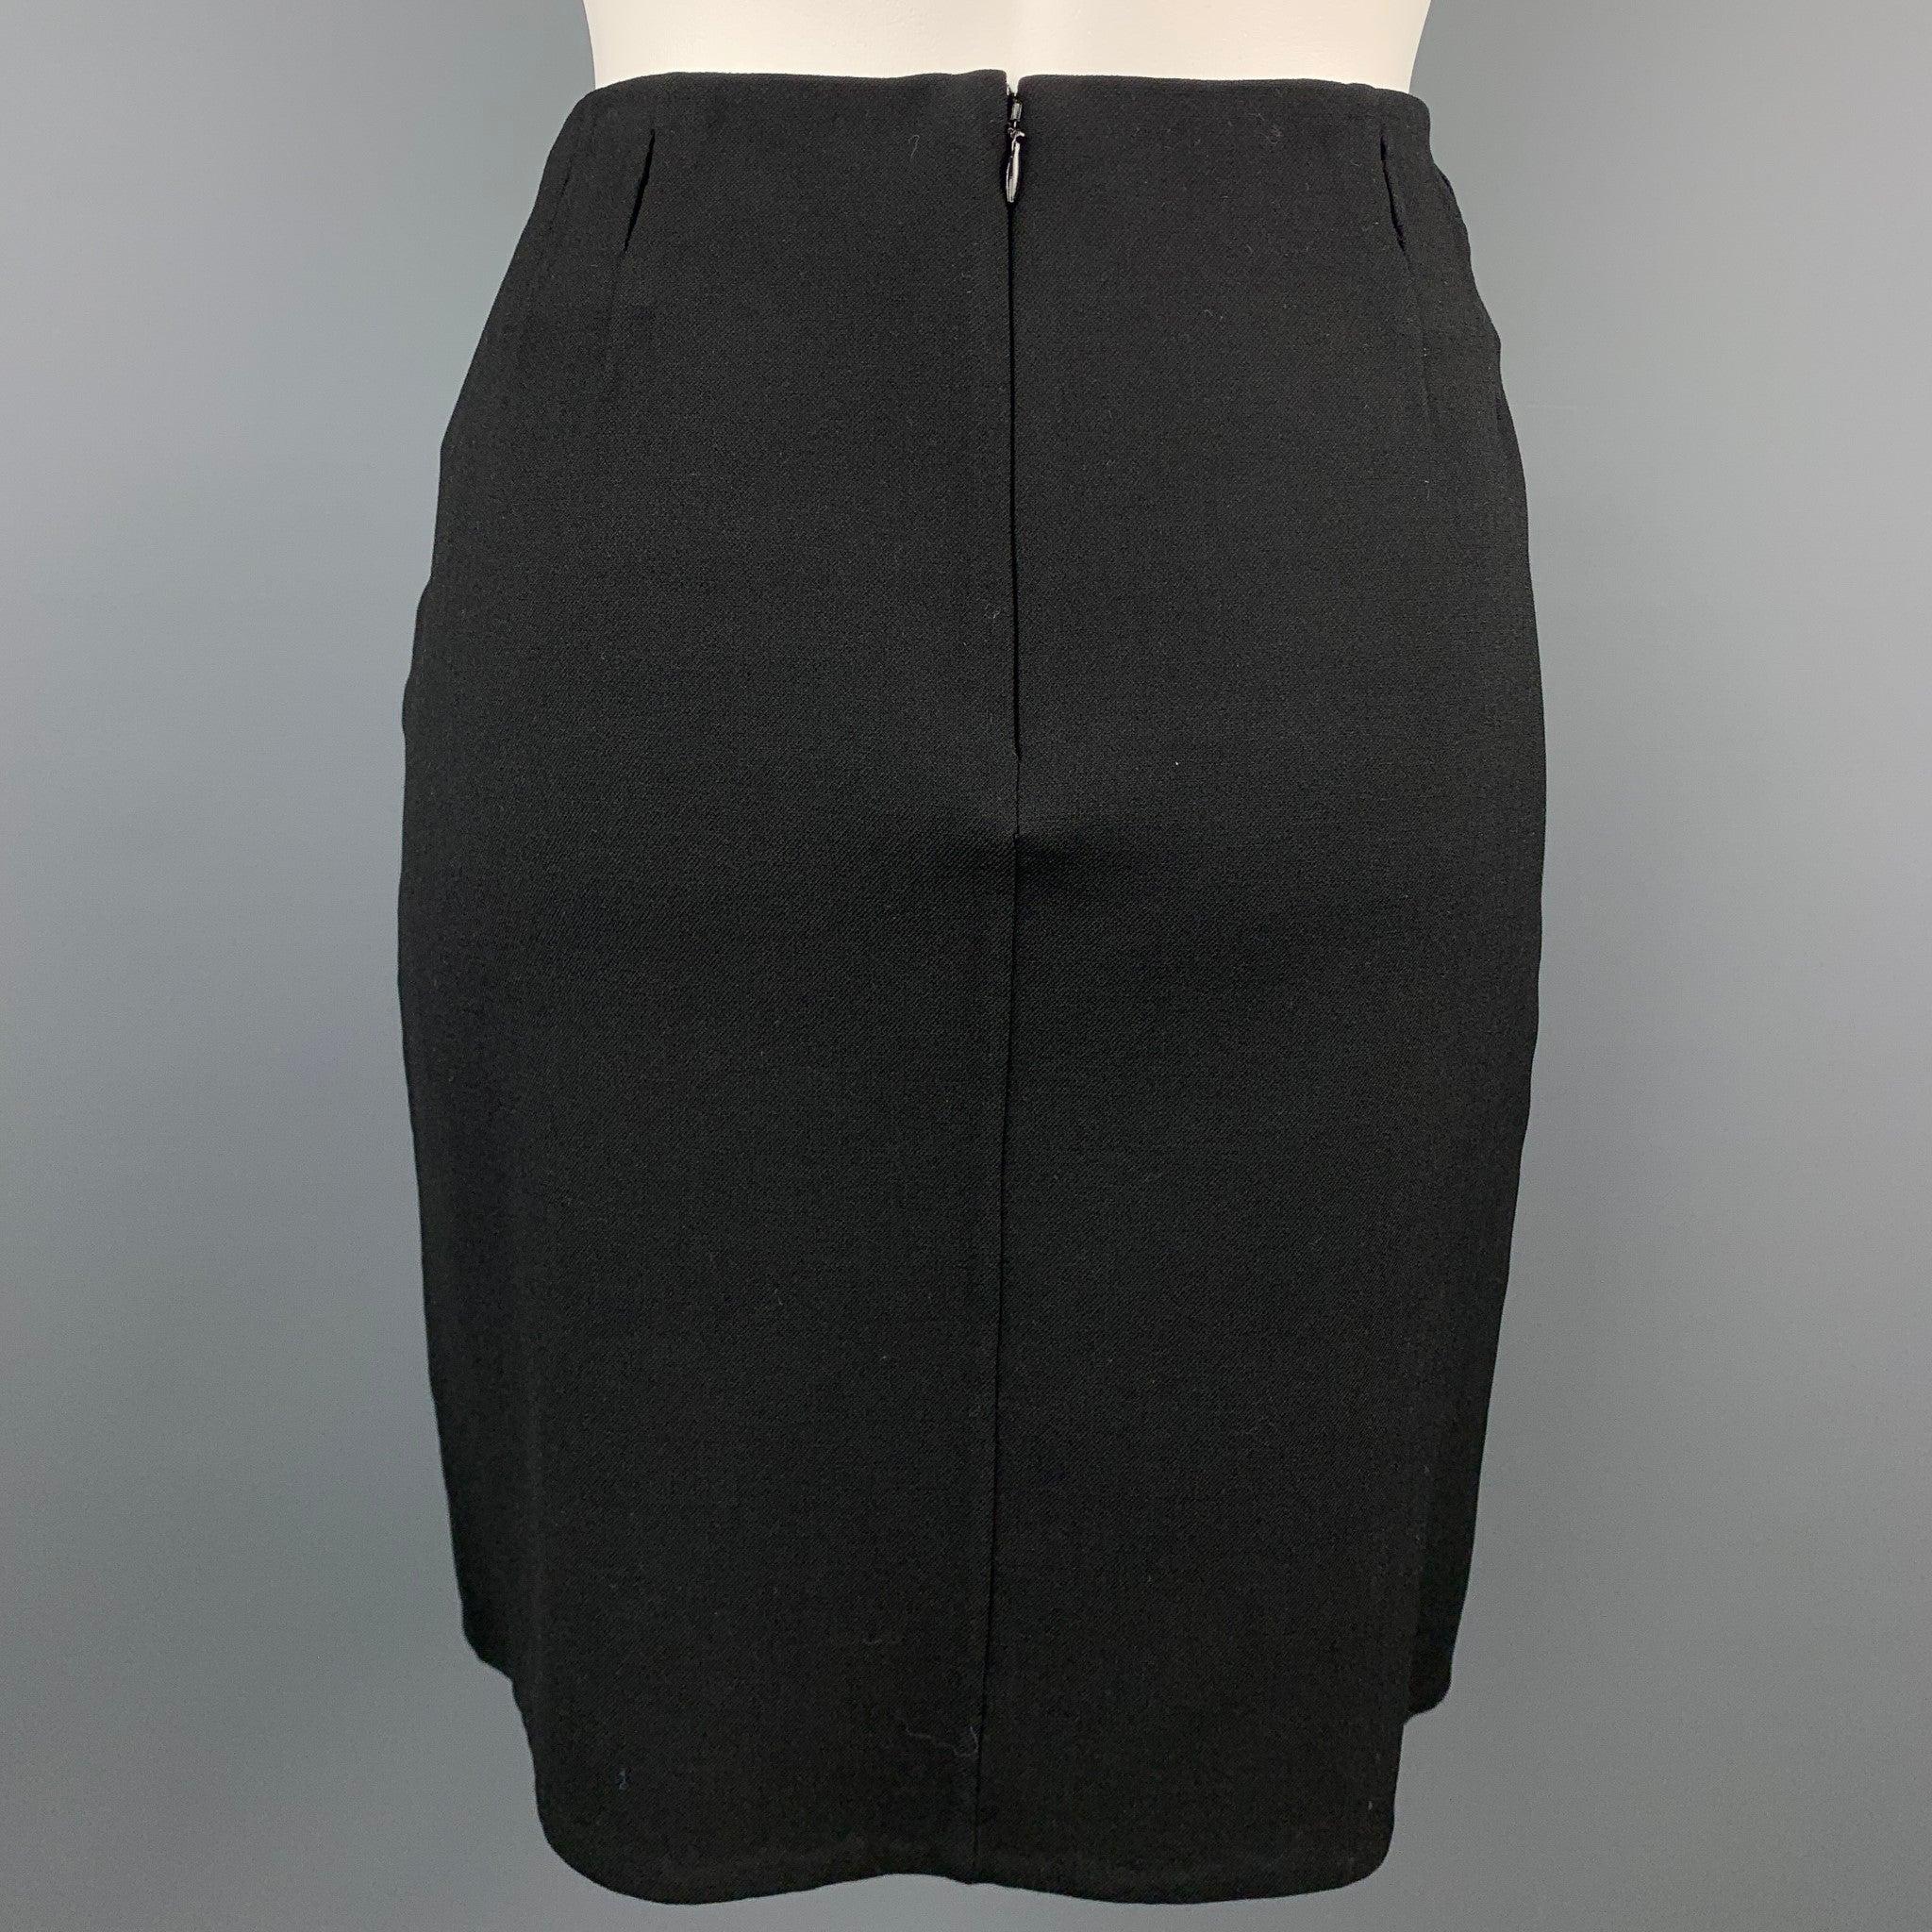 RALPH LAUREN COLLECTION Size 4 Black Twill Wool Blend Pencil Skirt In Good Condition For Sale In San Francisco, CA